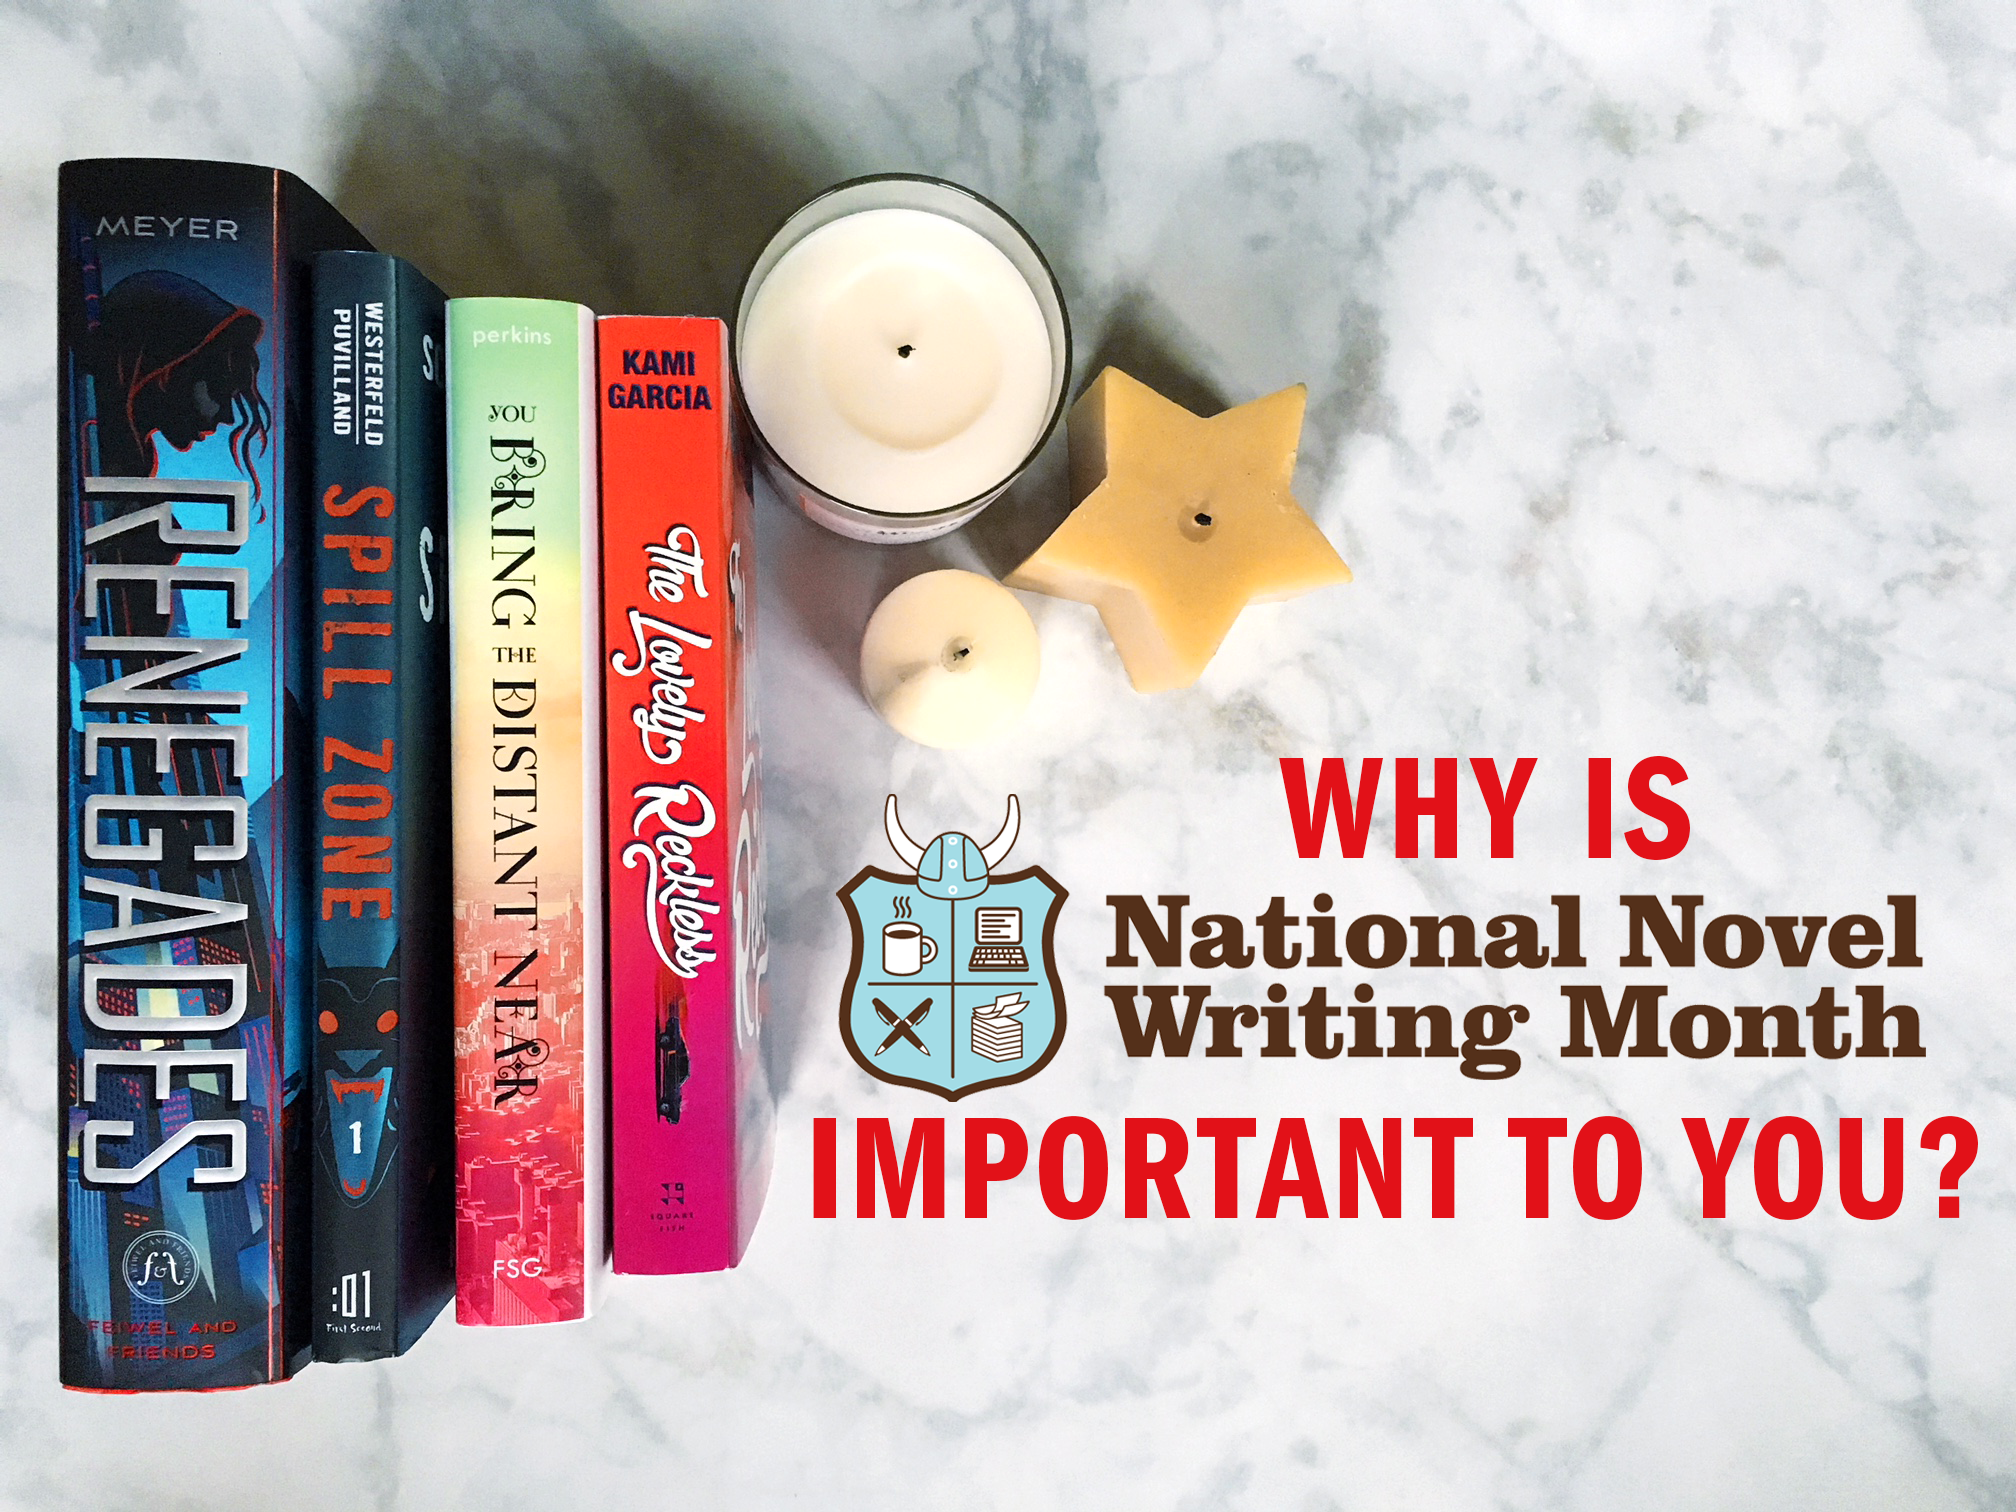 Kami Garcia Answers: Why is NaNoWriMo Important to You?